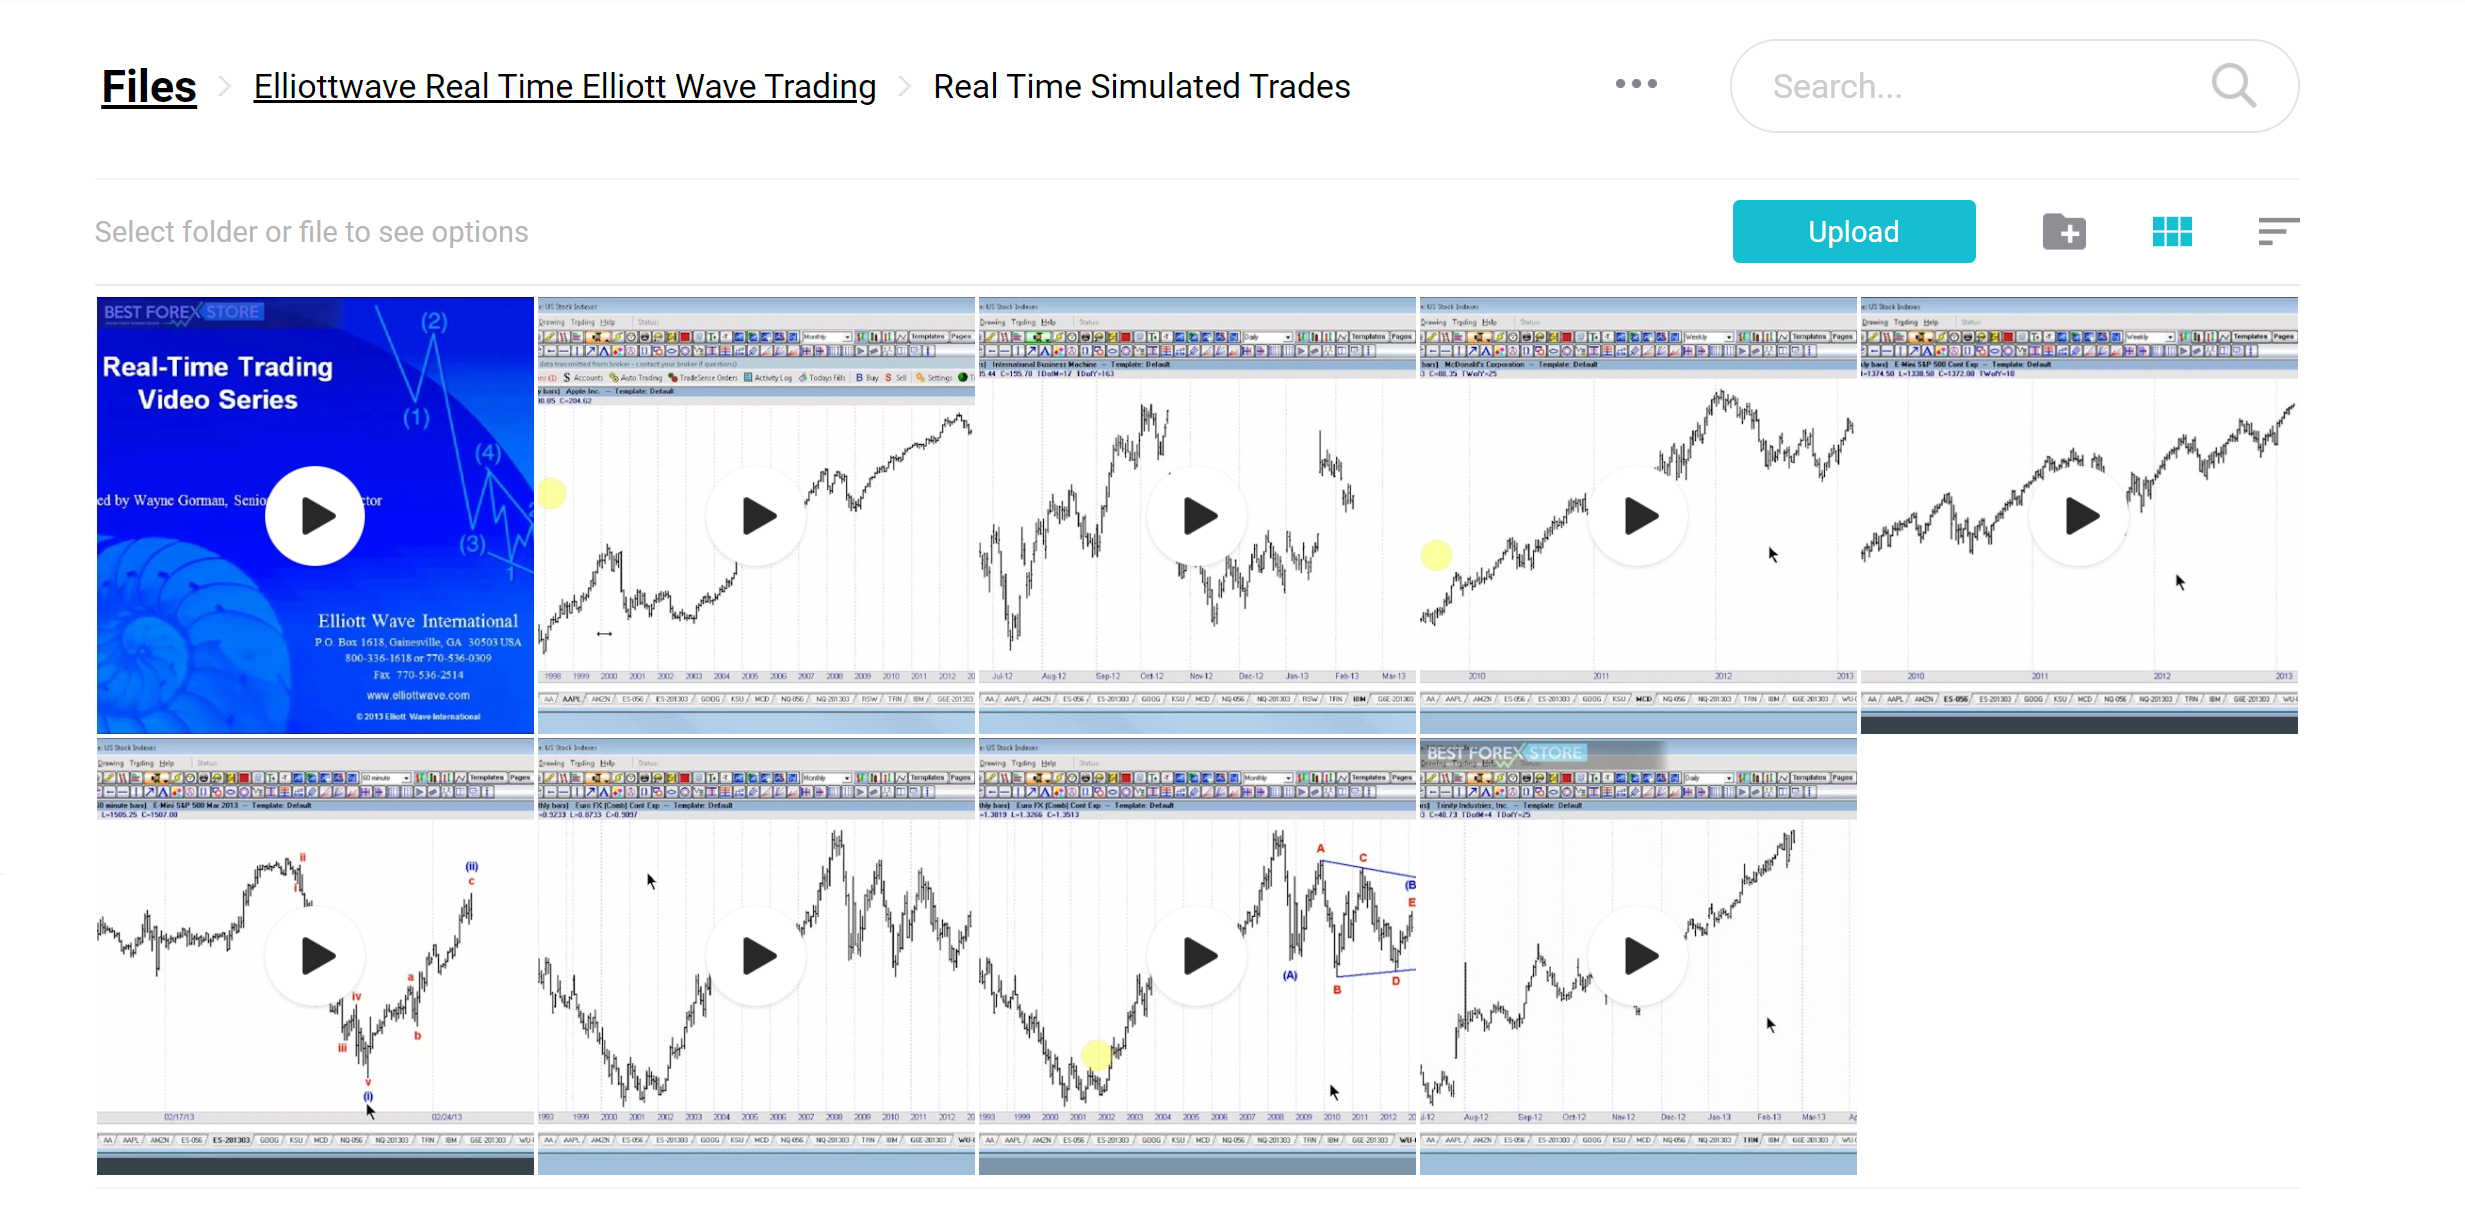 Real-Time Elliott Wave Trading Simulated 